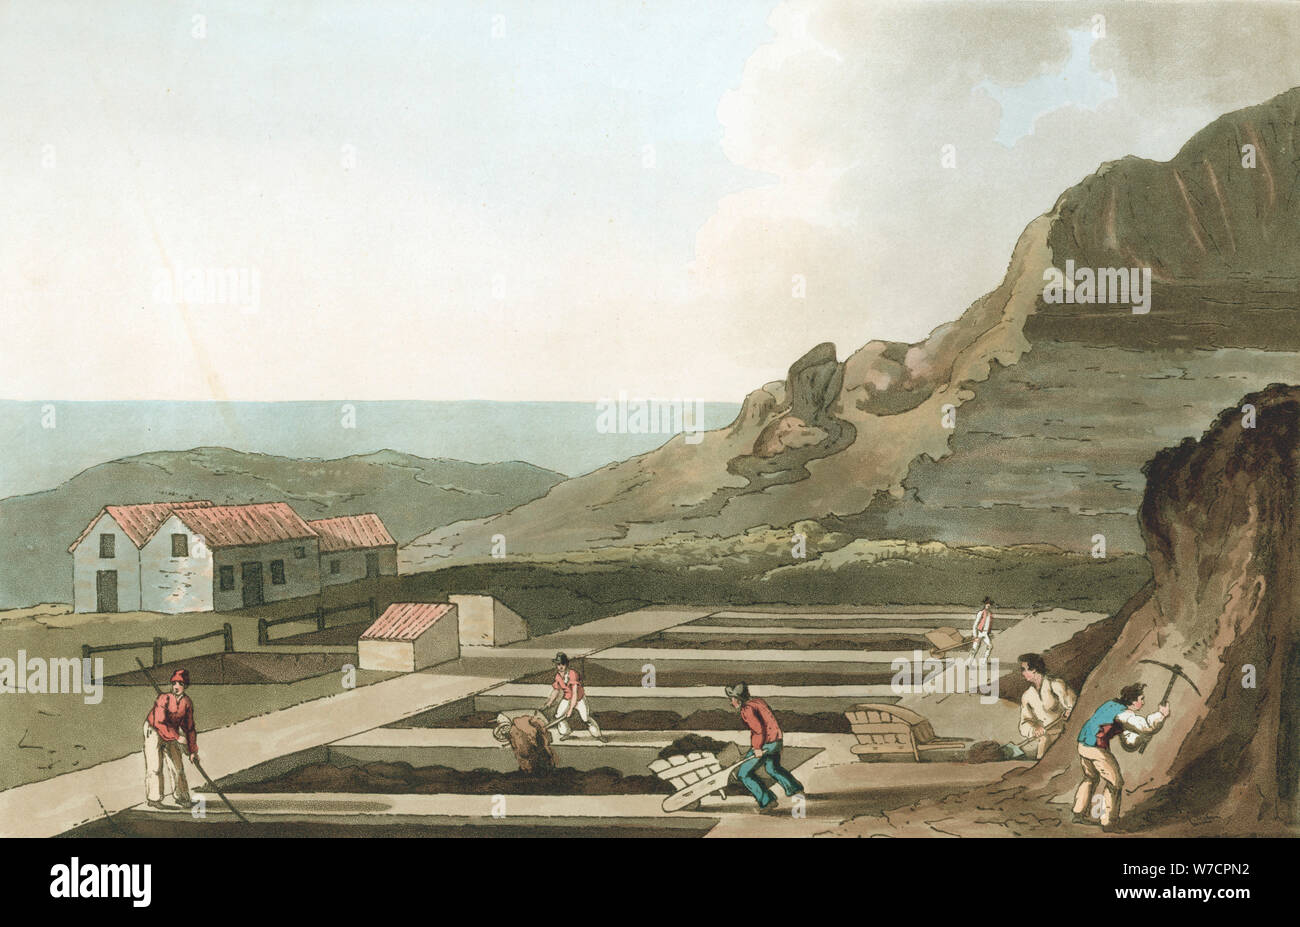 General view of an Alum works in the Whitby area, Yorkshire, 1814. Artist: Havell & Son Stock Photo